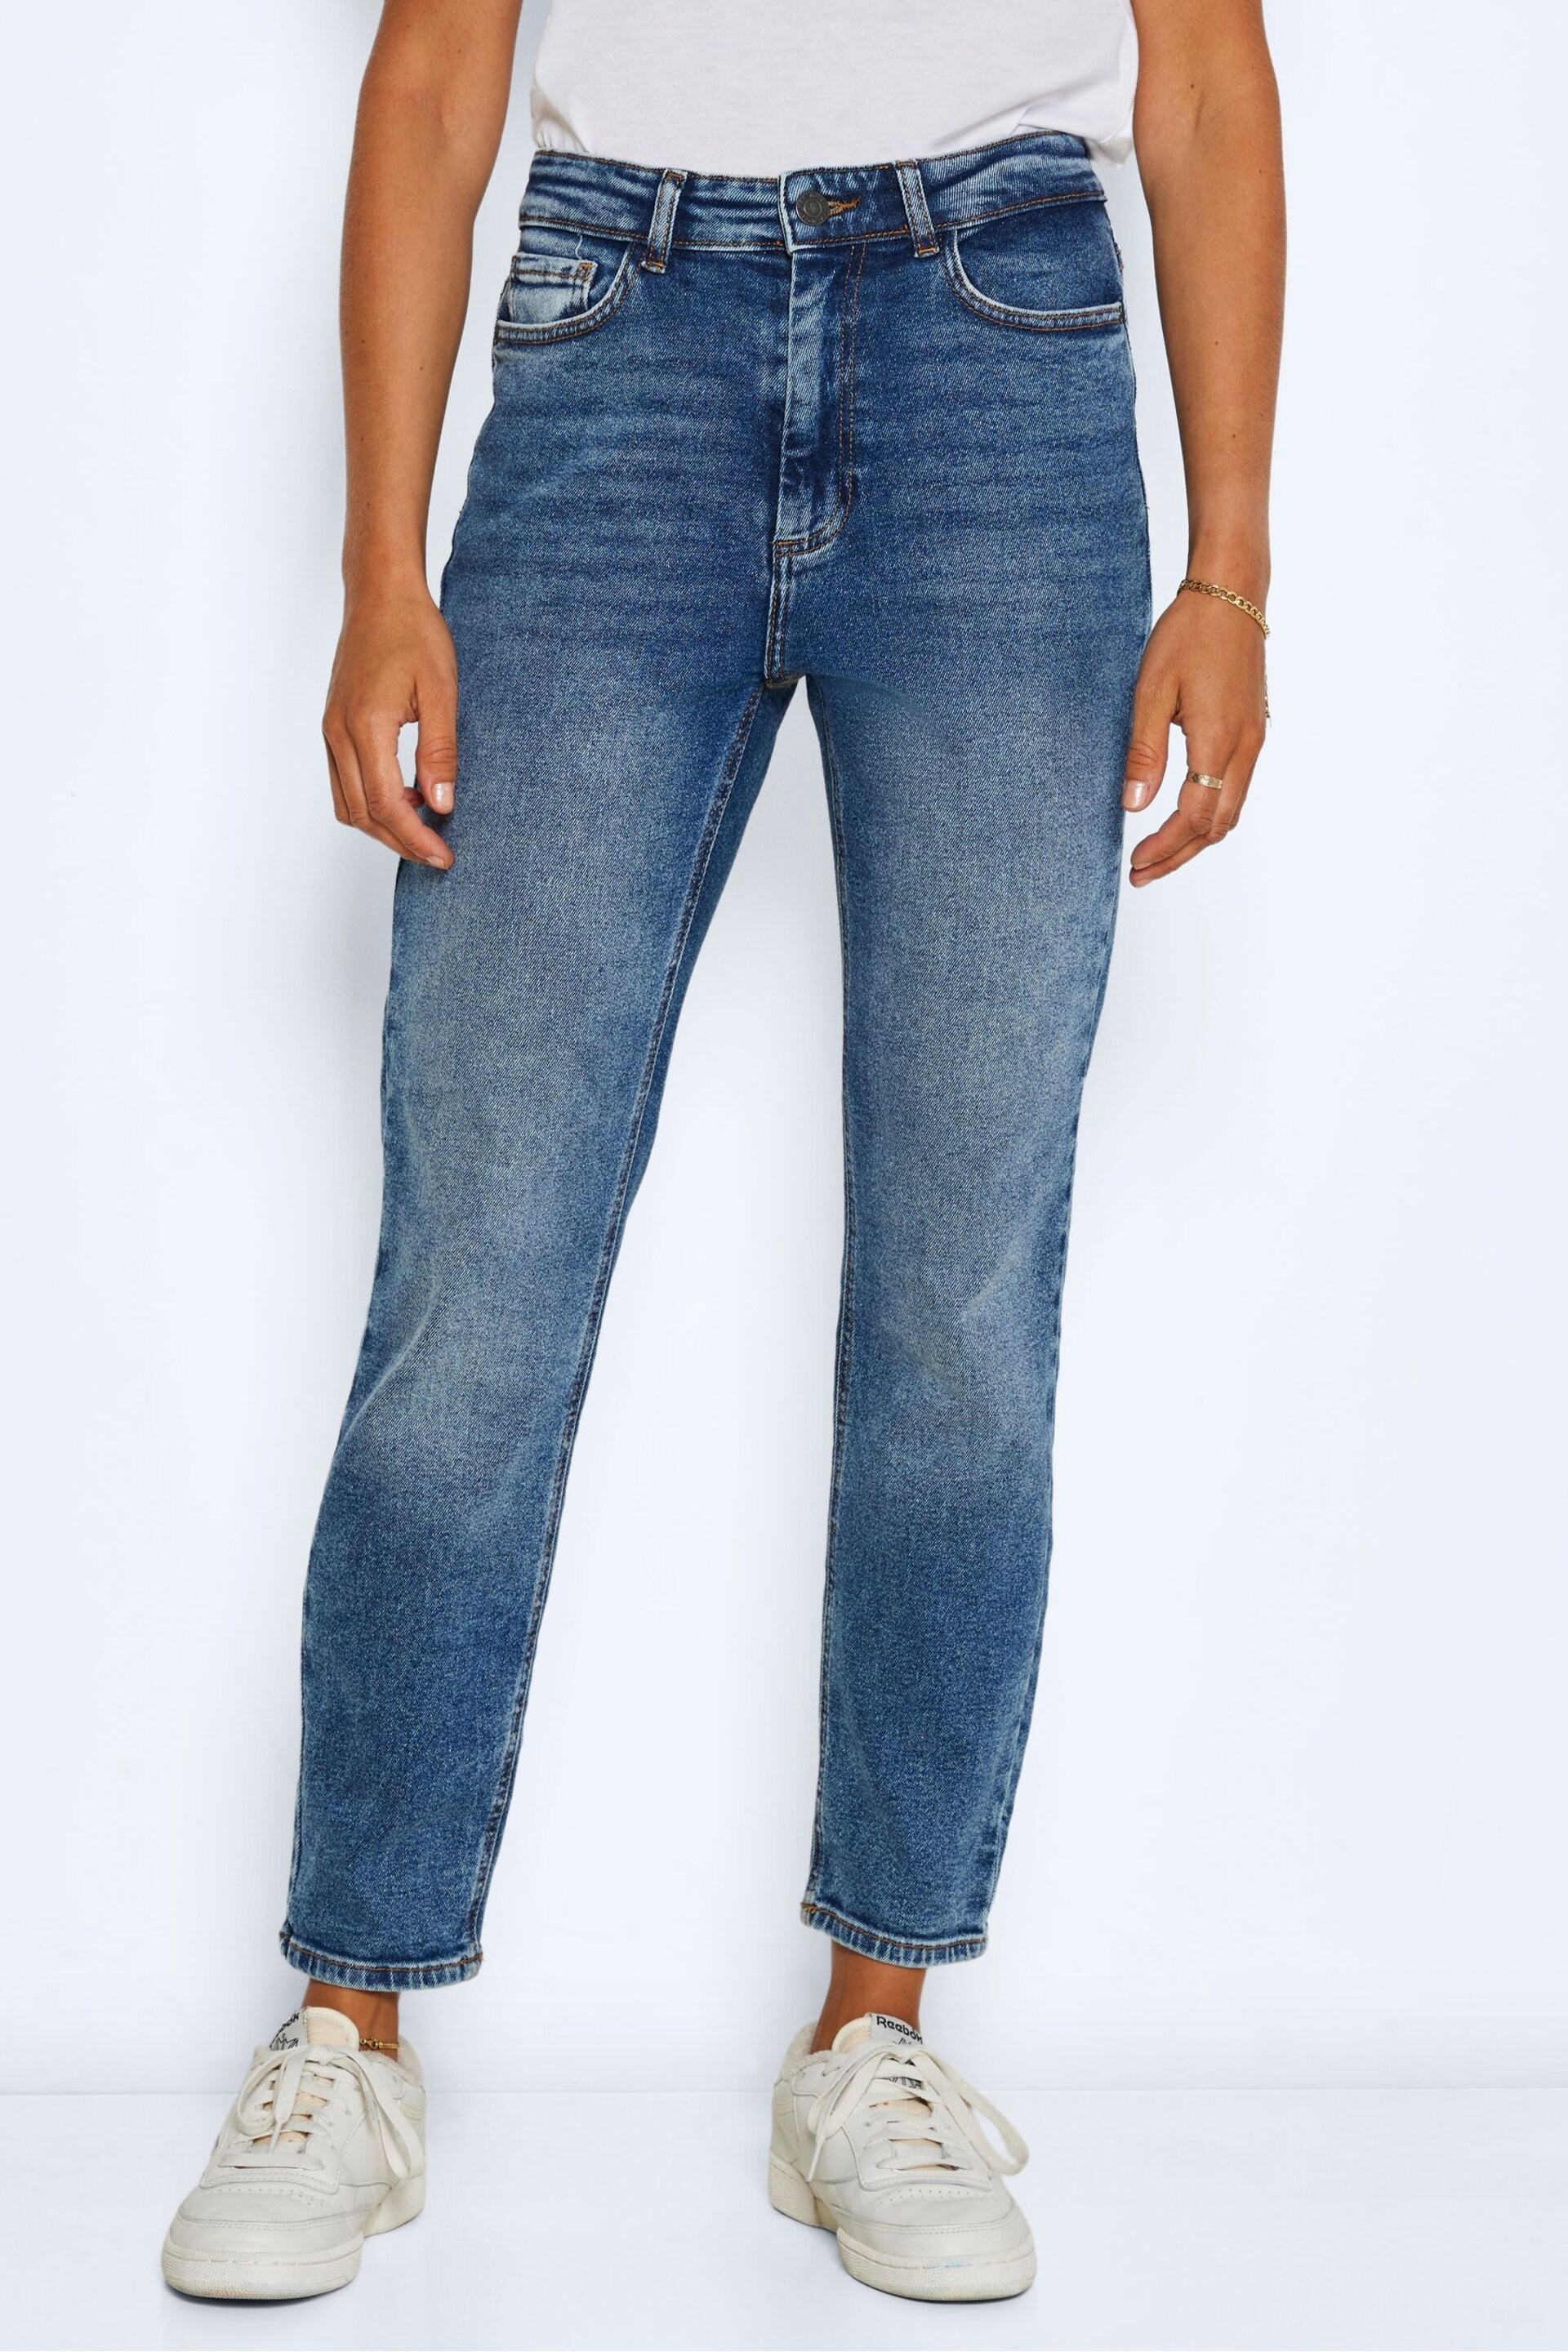 NOISY MAY Blue High Waisted Straight Leg Jeans - Image 1 of 7